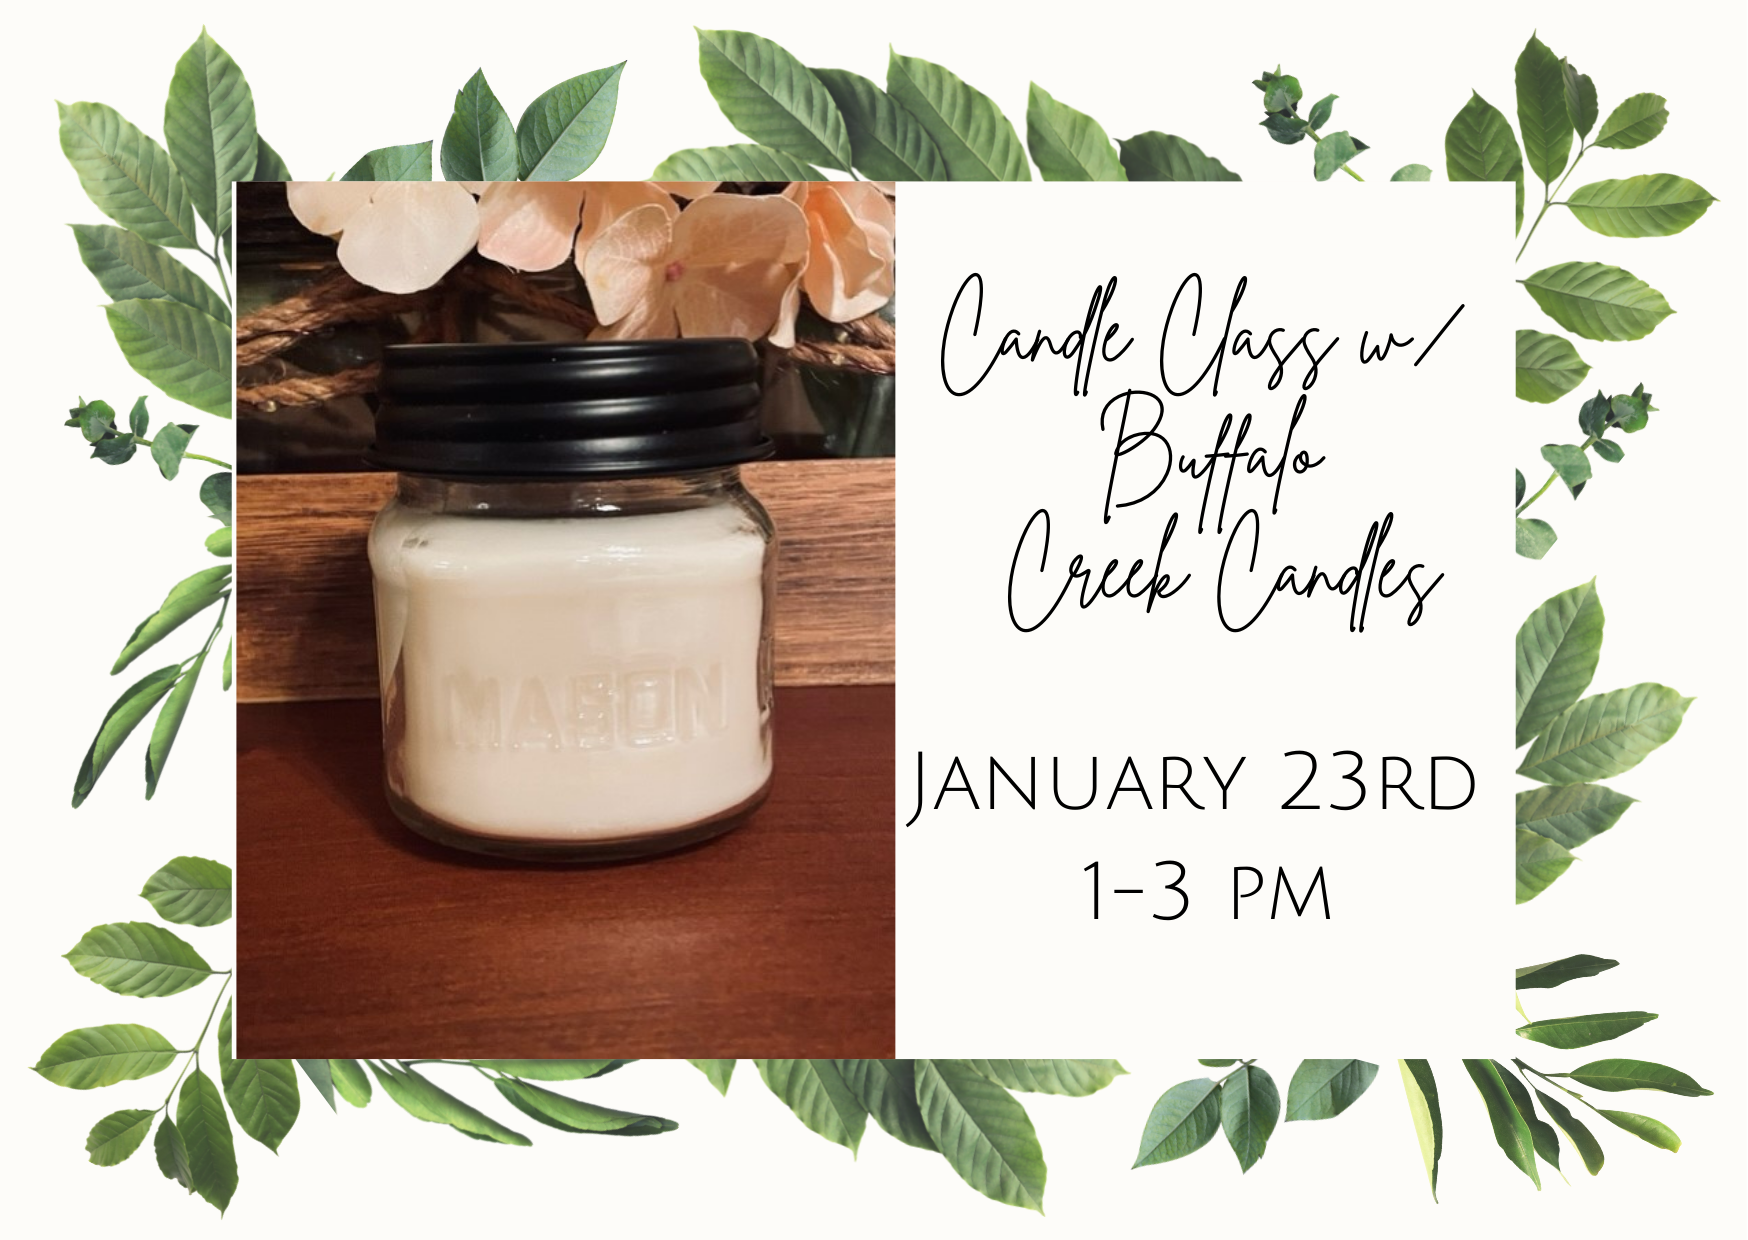 Candle Class w/ Buffalo Creek Candles-SOLD OUT!